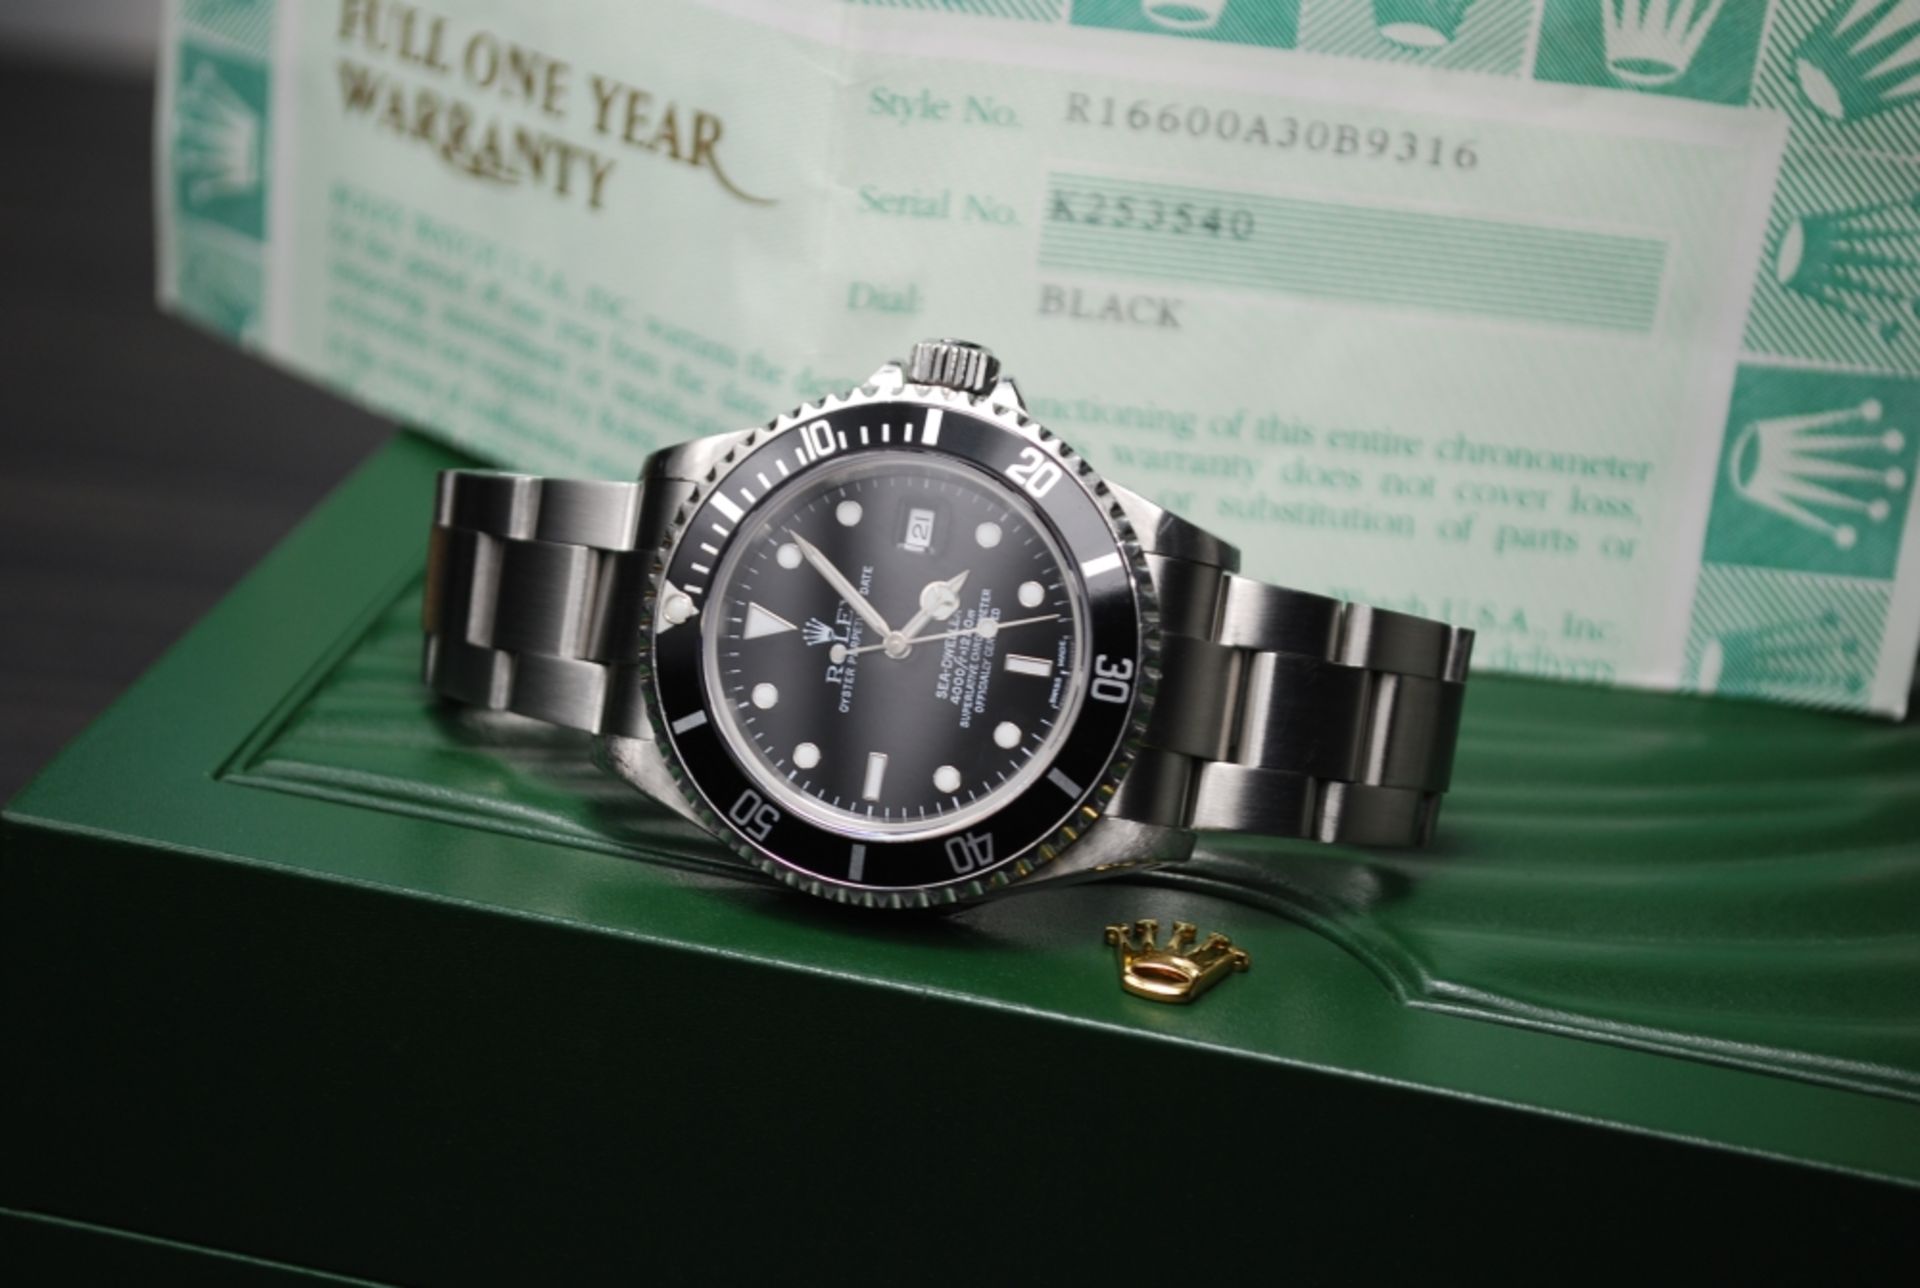 Rolex 16600 Sea Dweller - Complete with original Box & Papers - Current RRP: £6,450